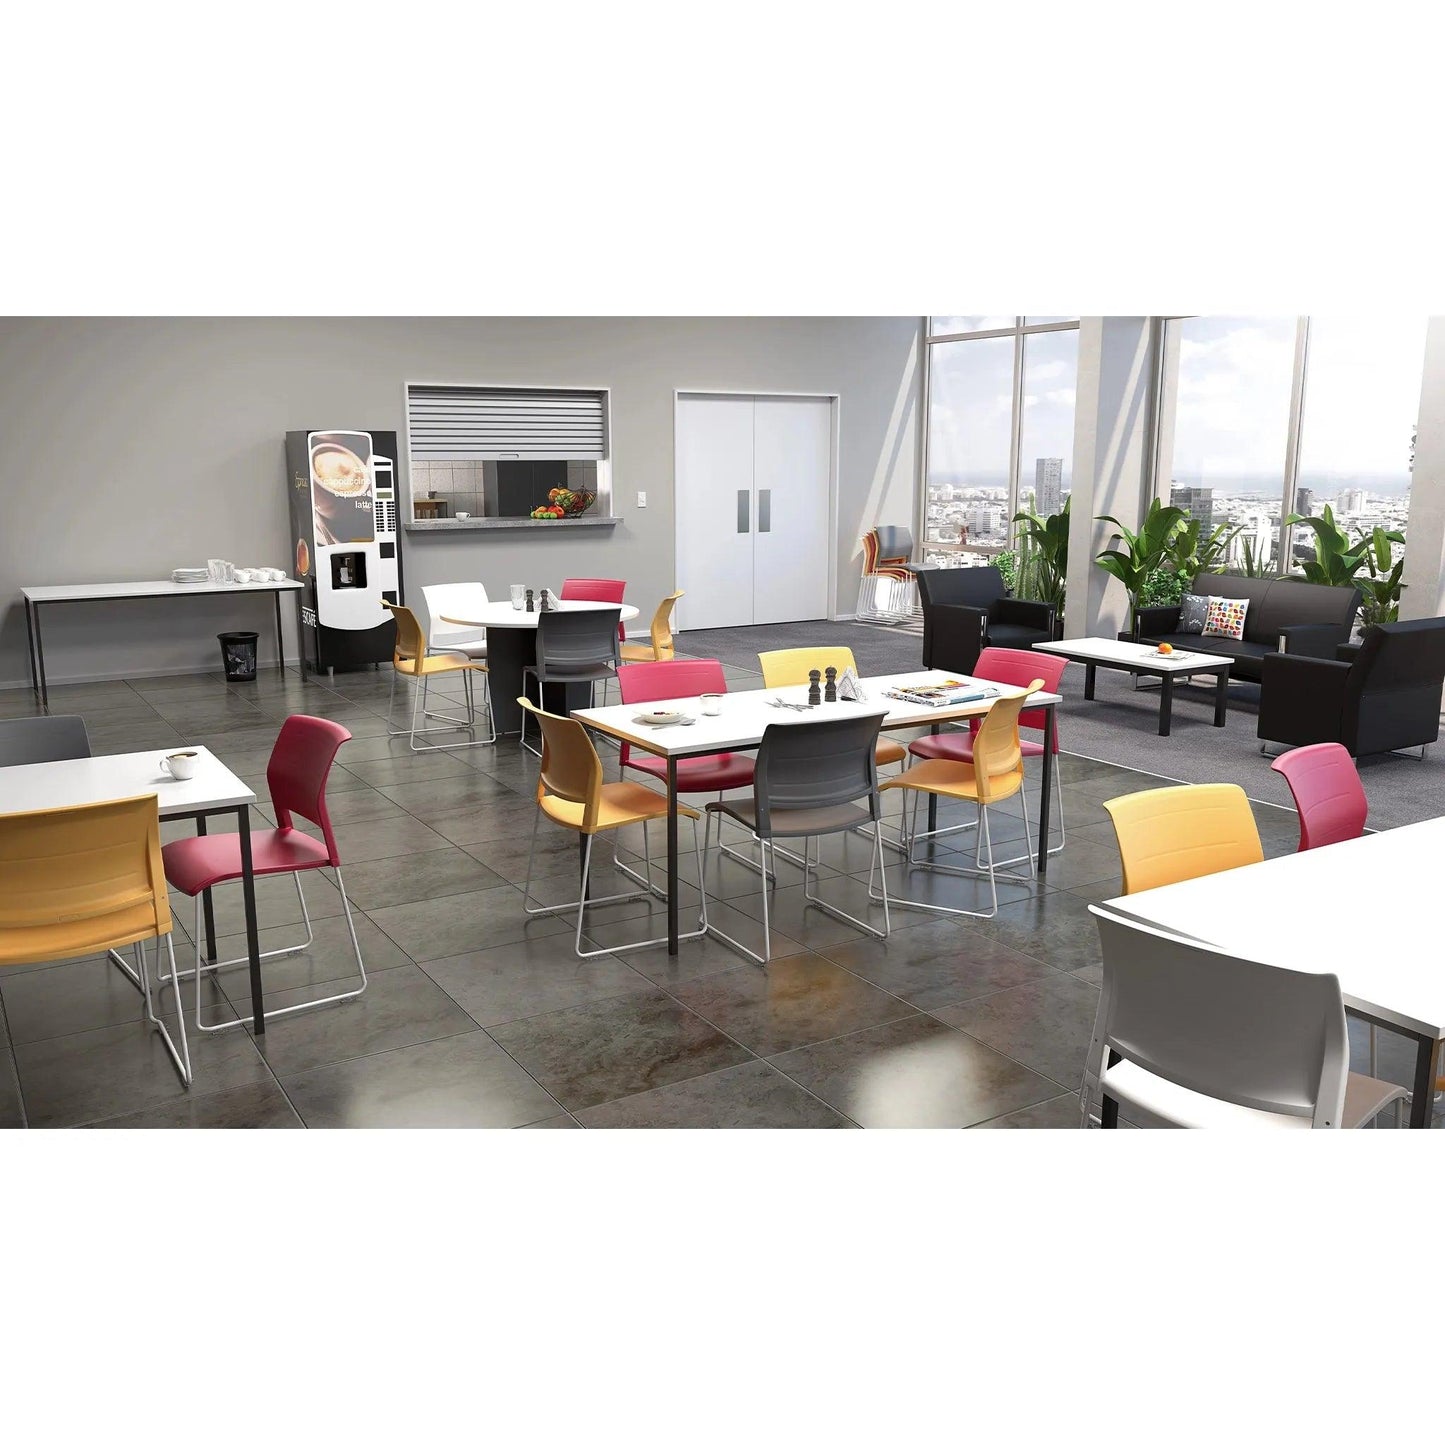 EkoSystem Steel Frame Canteen Table - Office Furniture Company 